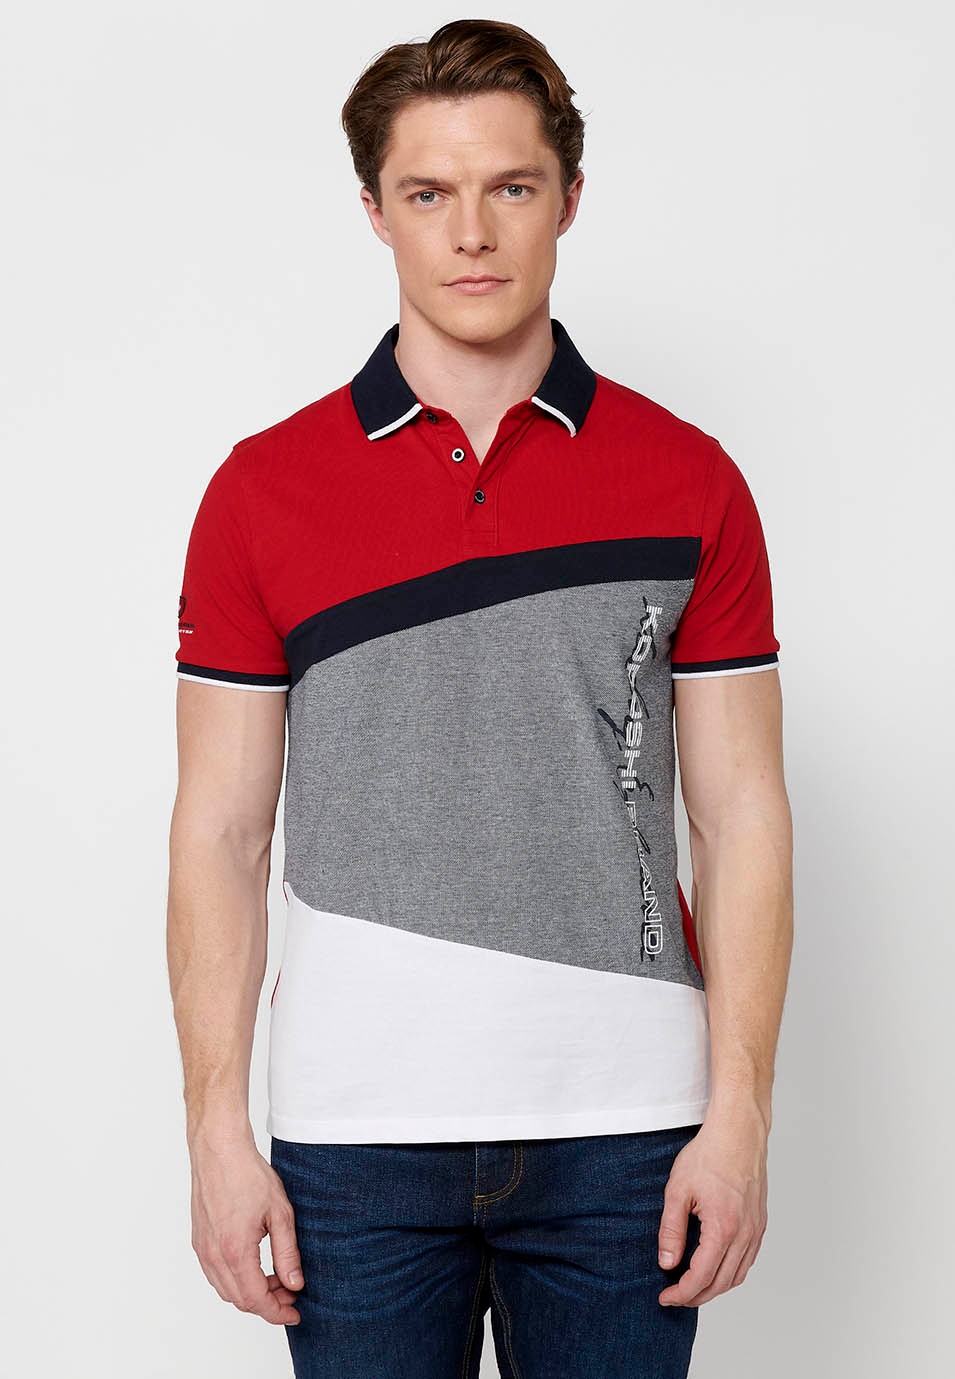 Short-sleeved cotton polo shirt with shirt collar with buttons in Red for Men 5